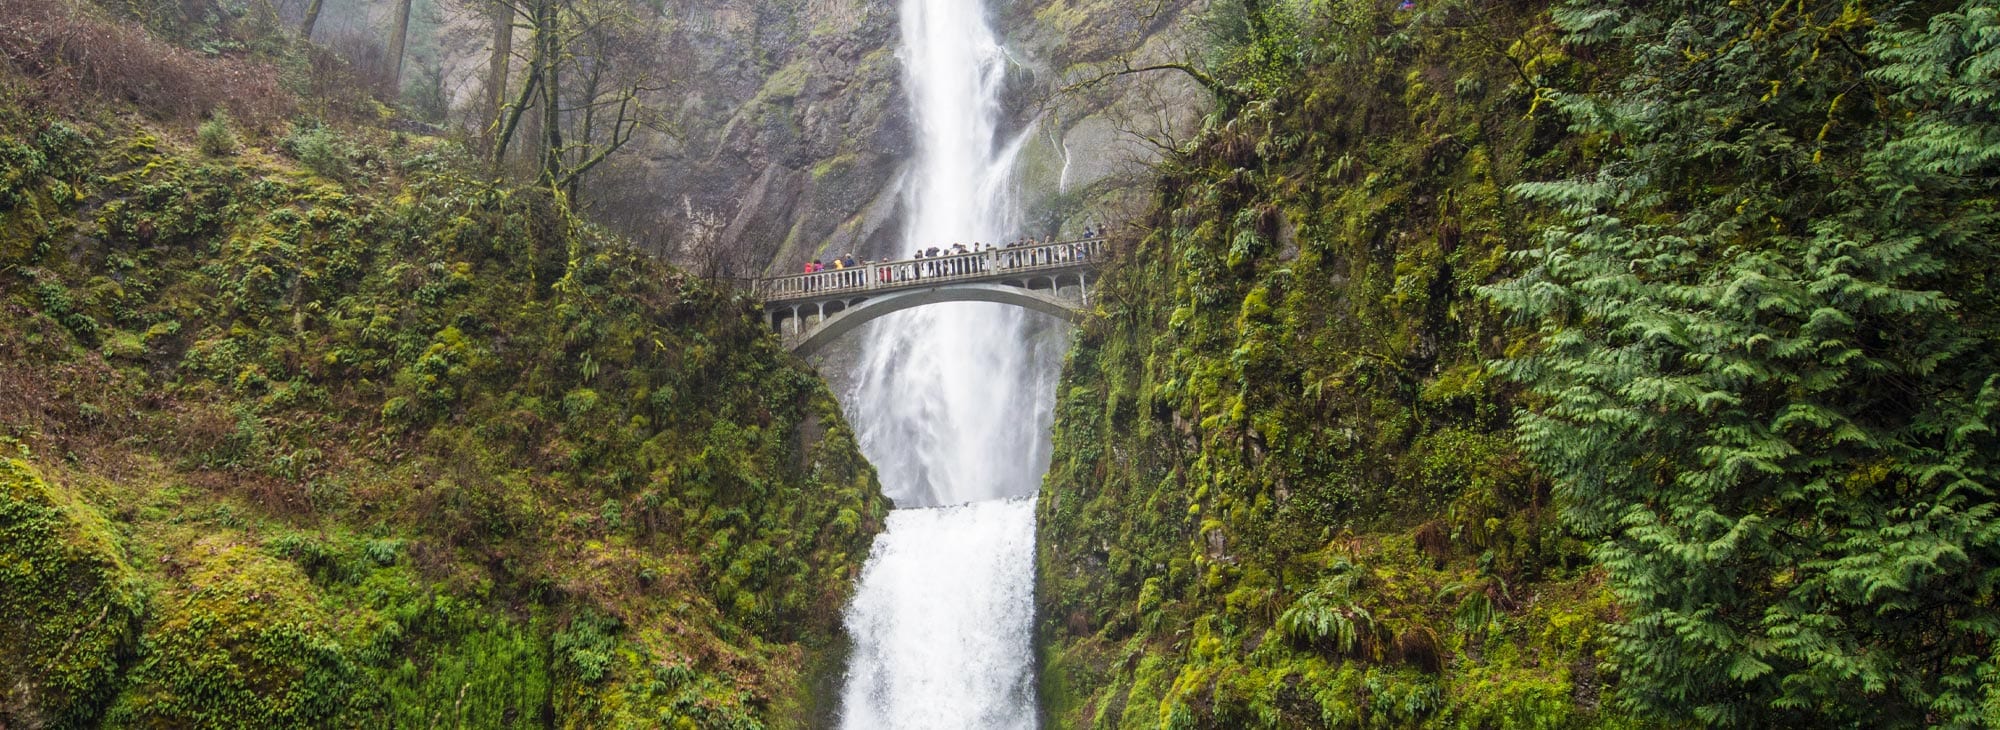 How To Book Your Tickets To Visit Multnomah Falls Travel Oregon